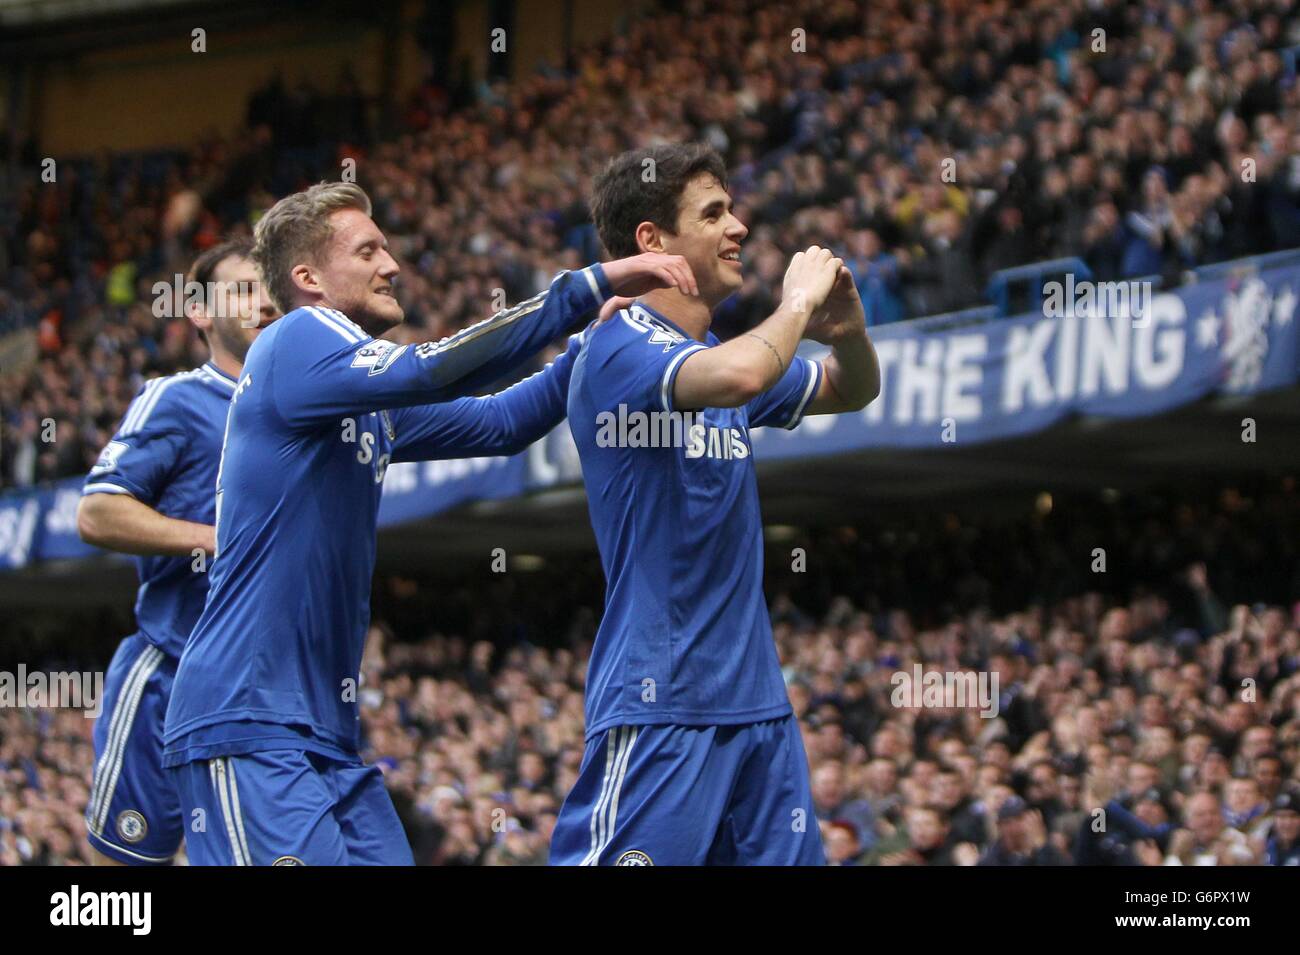 Chelsea's Emboaba Oscar celebrates scoring their first goal of the game with team0mate Andre Schurrle (left) Stock Photo